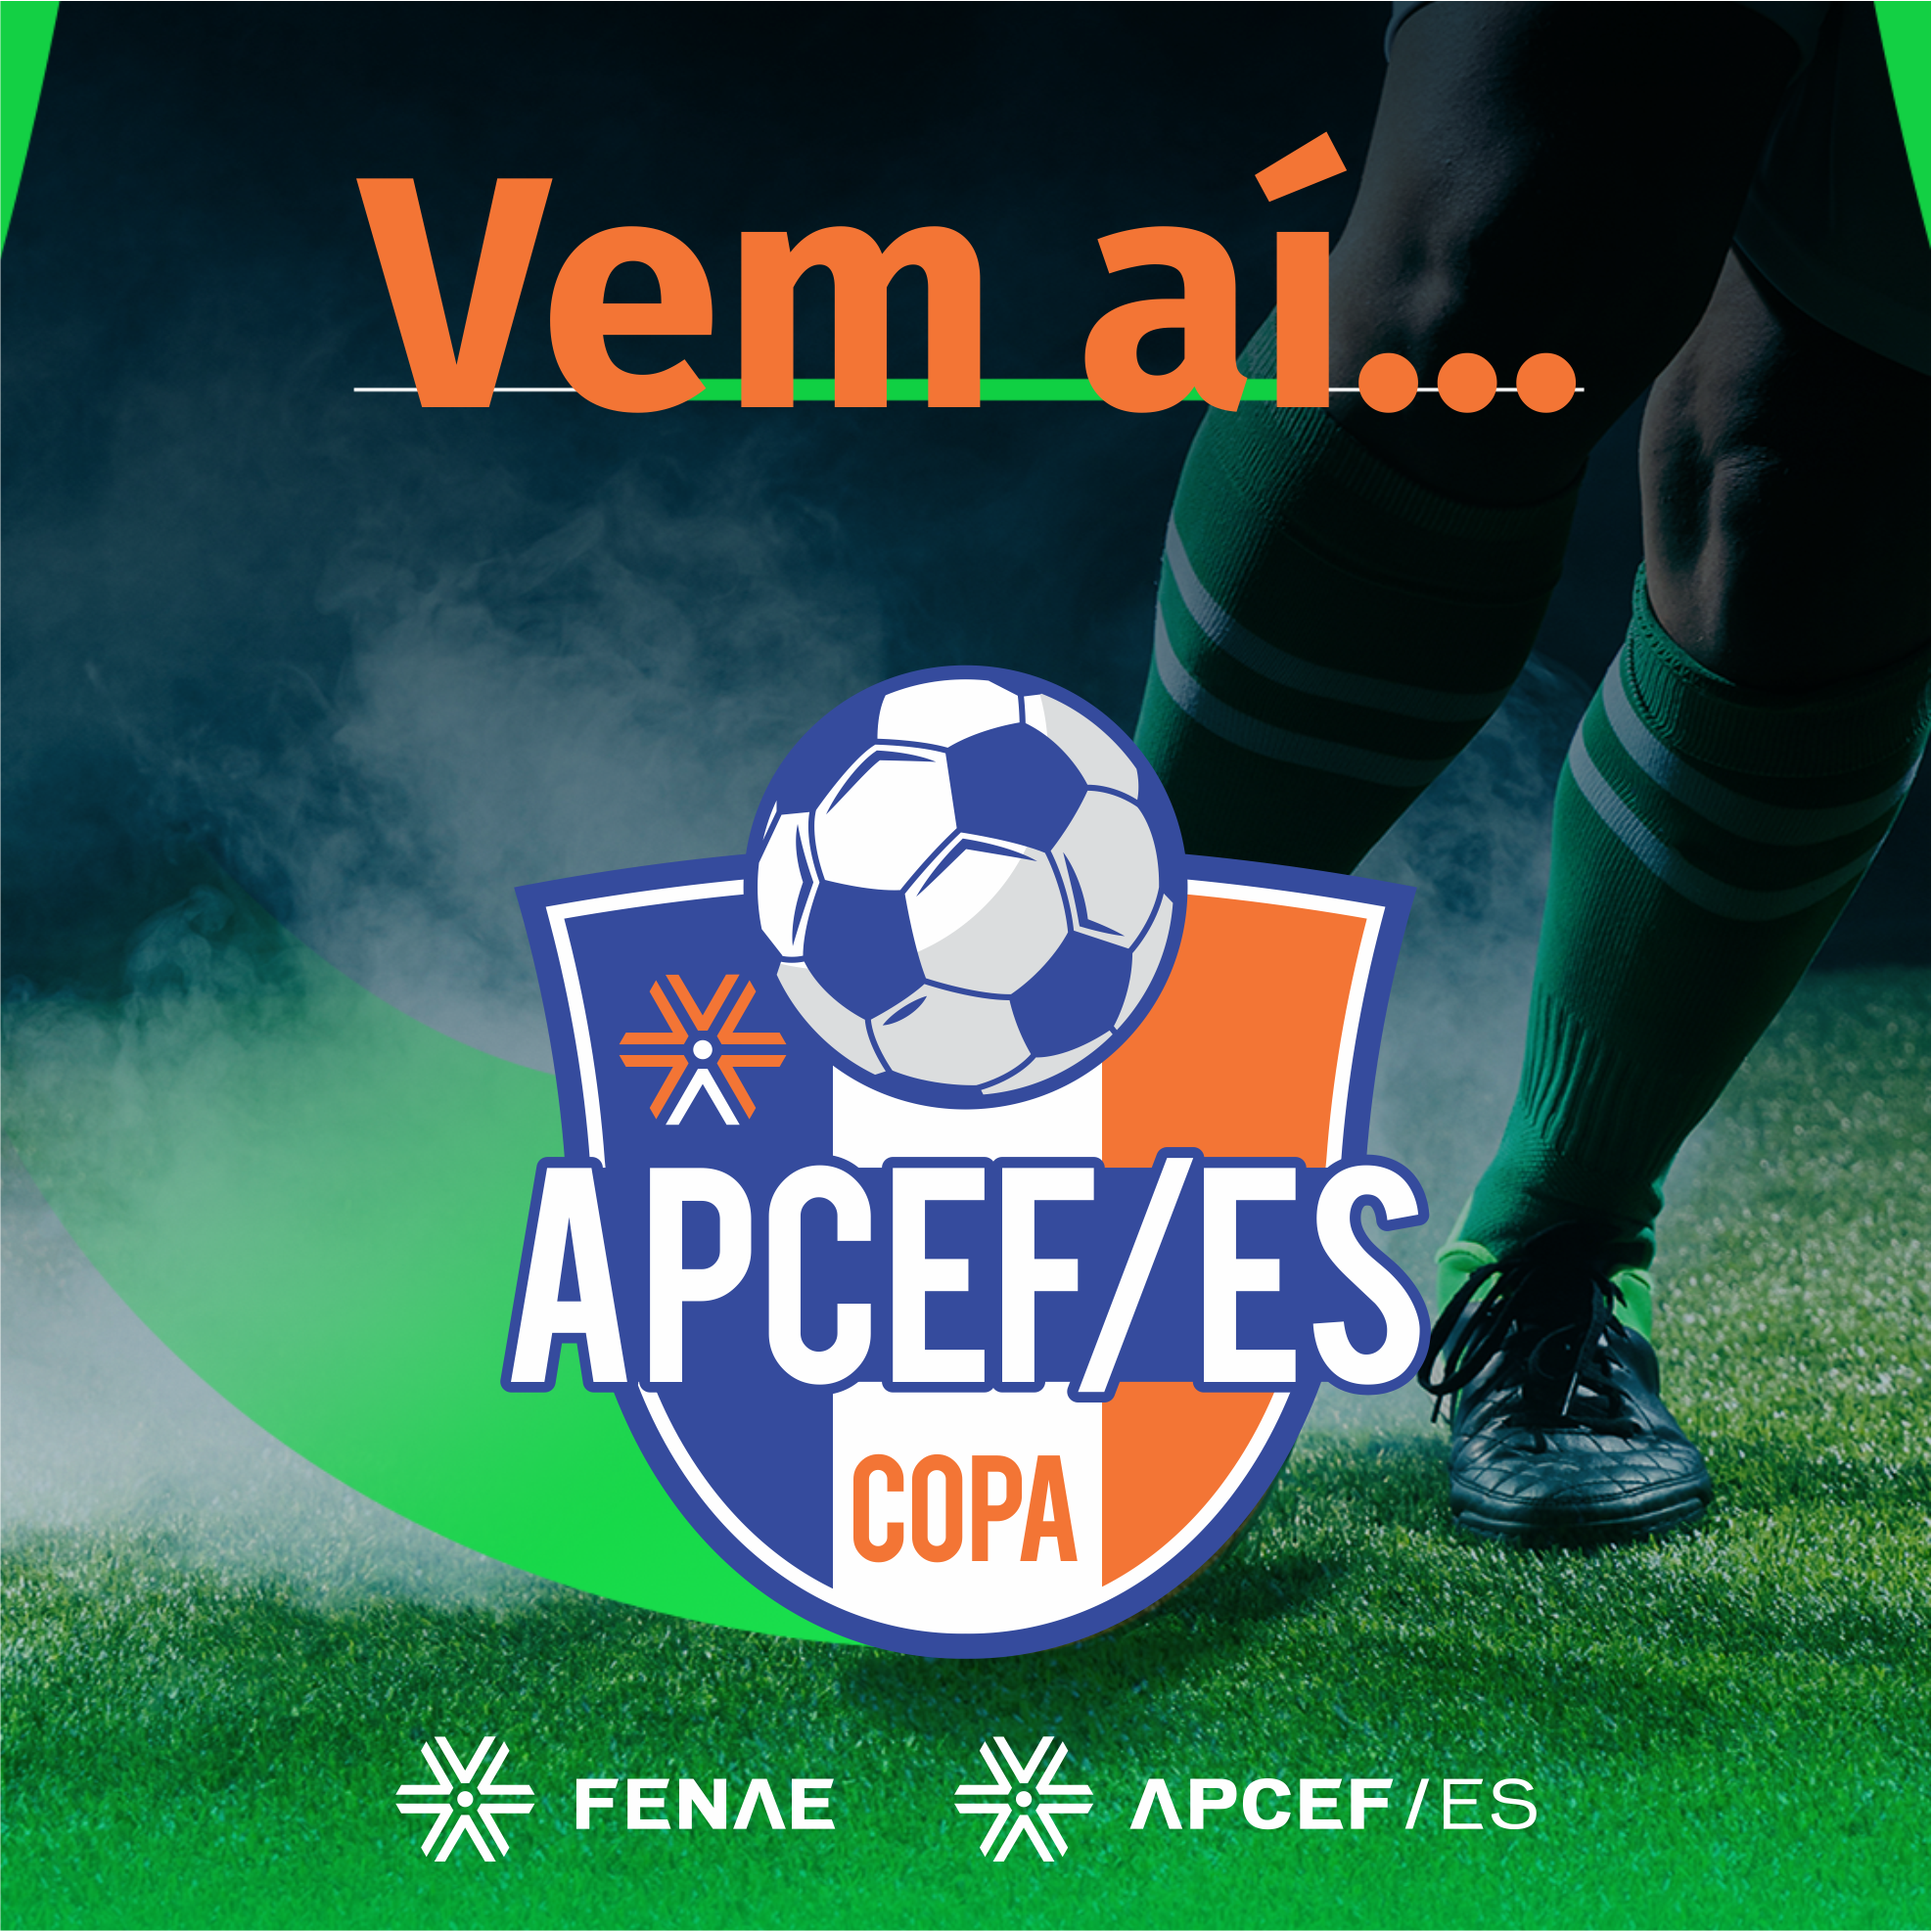 Copa APCEFES - post.png